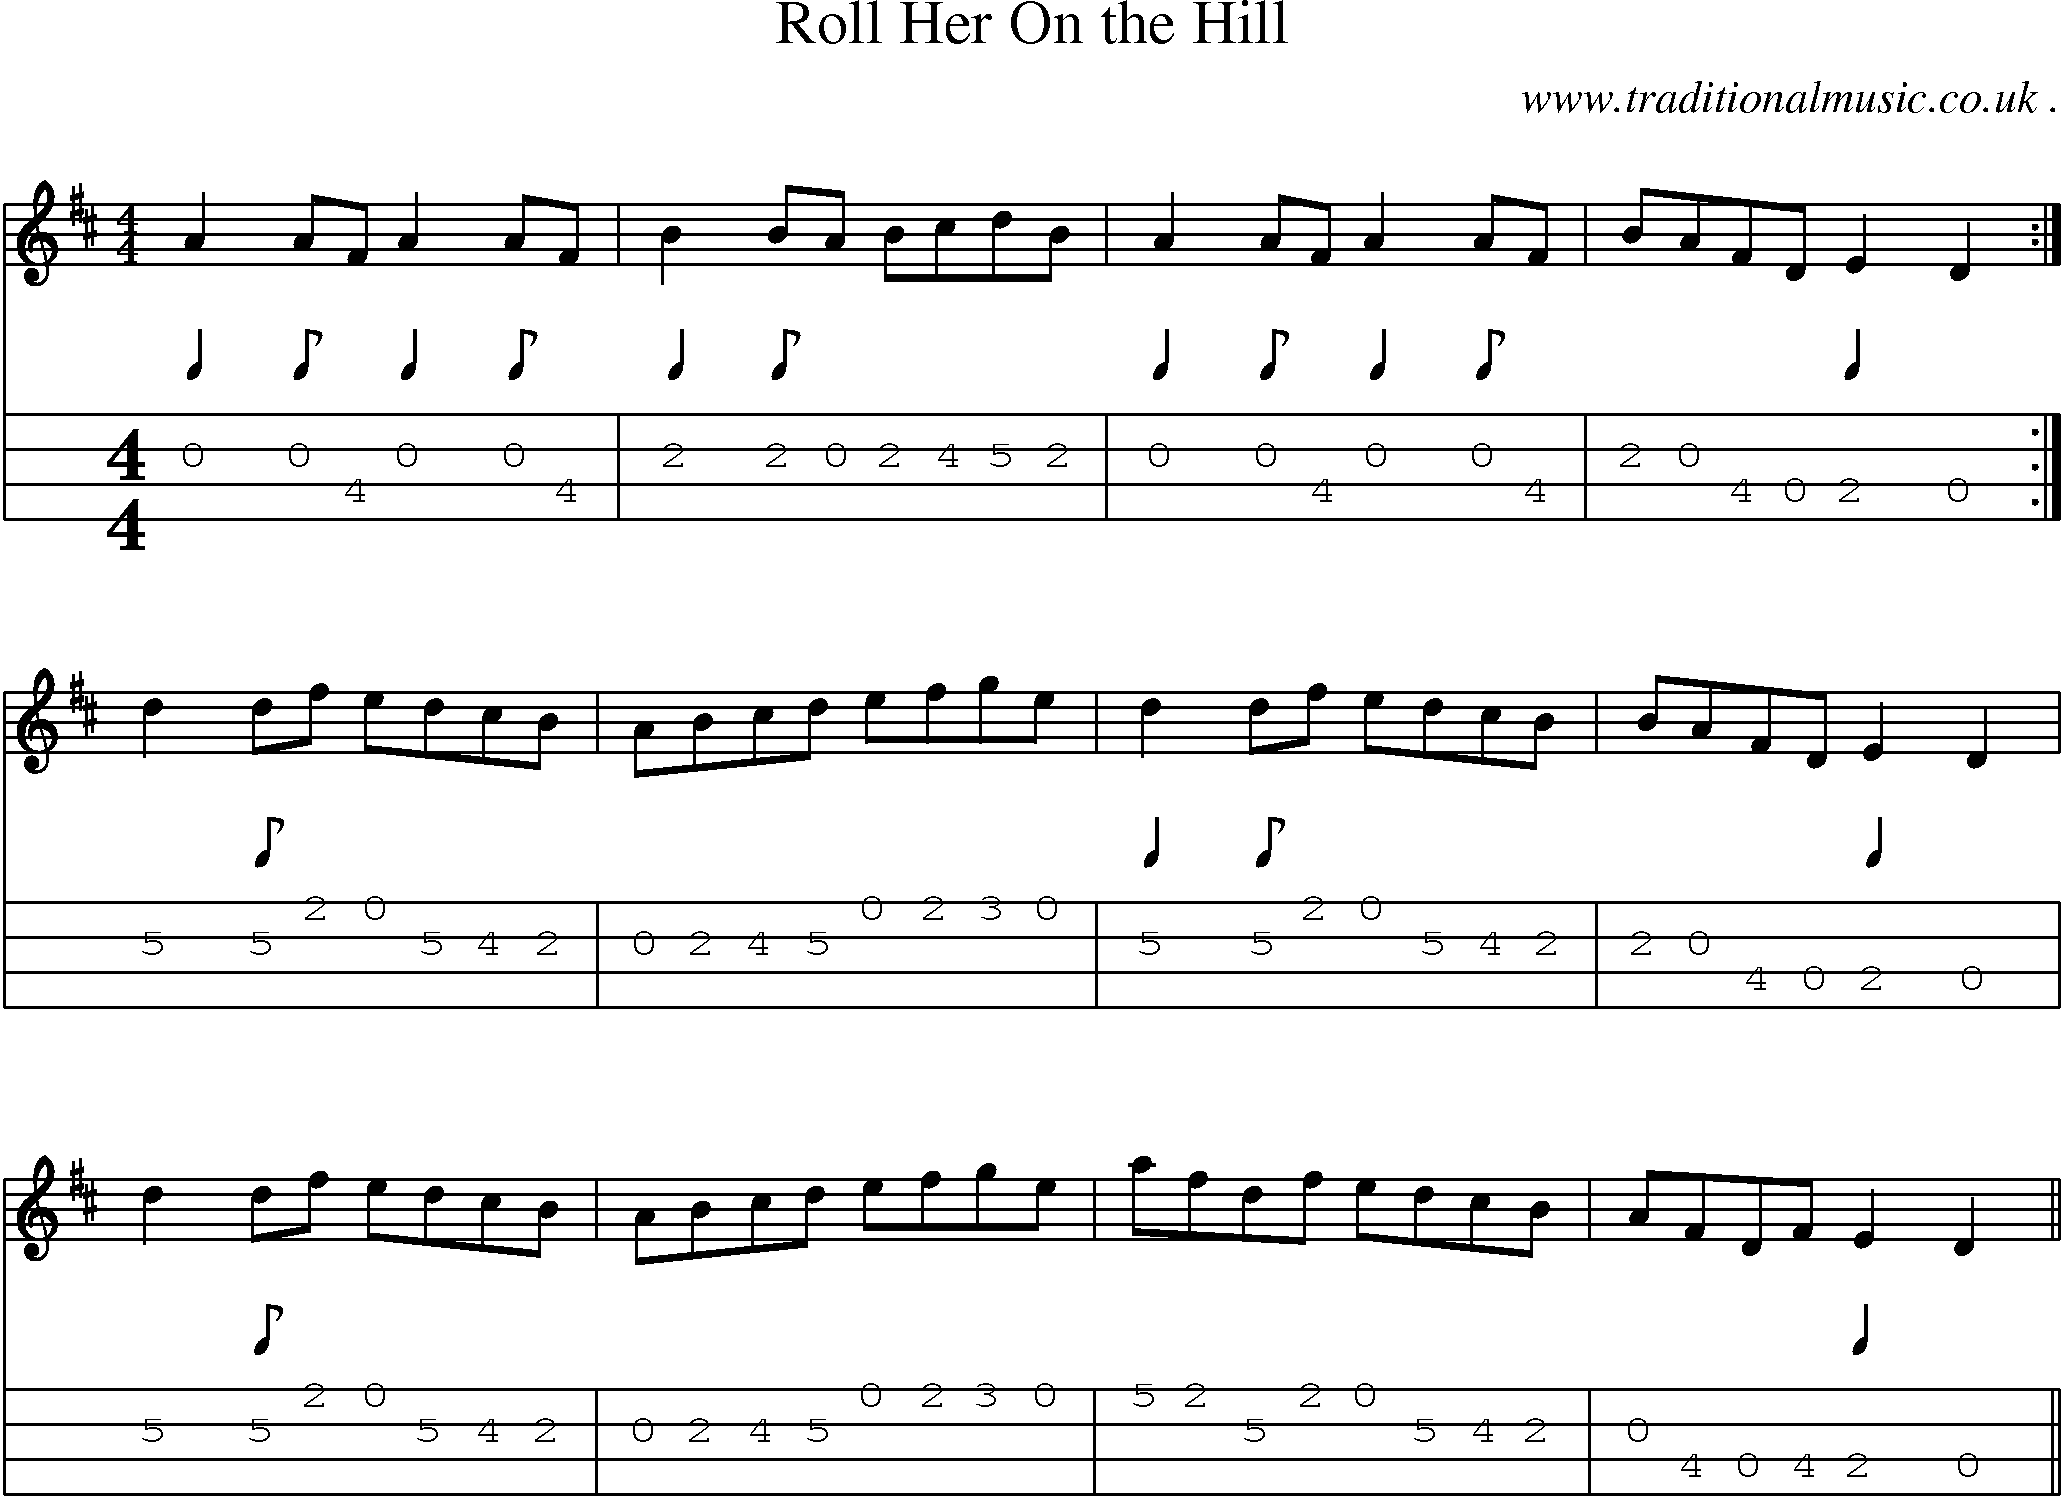 Sheet-music  score, Chords and Mandolin Tabs for Roll Her On The Hill